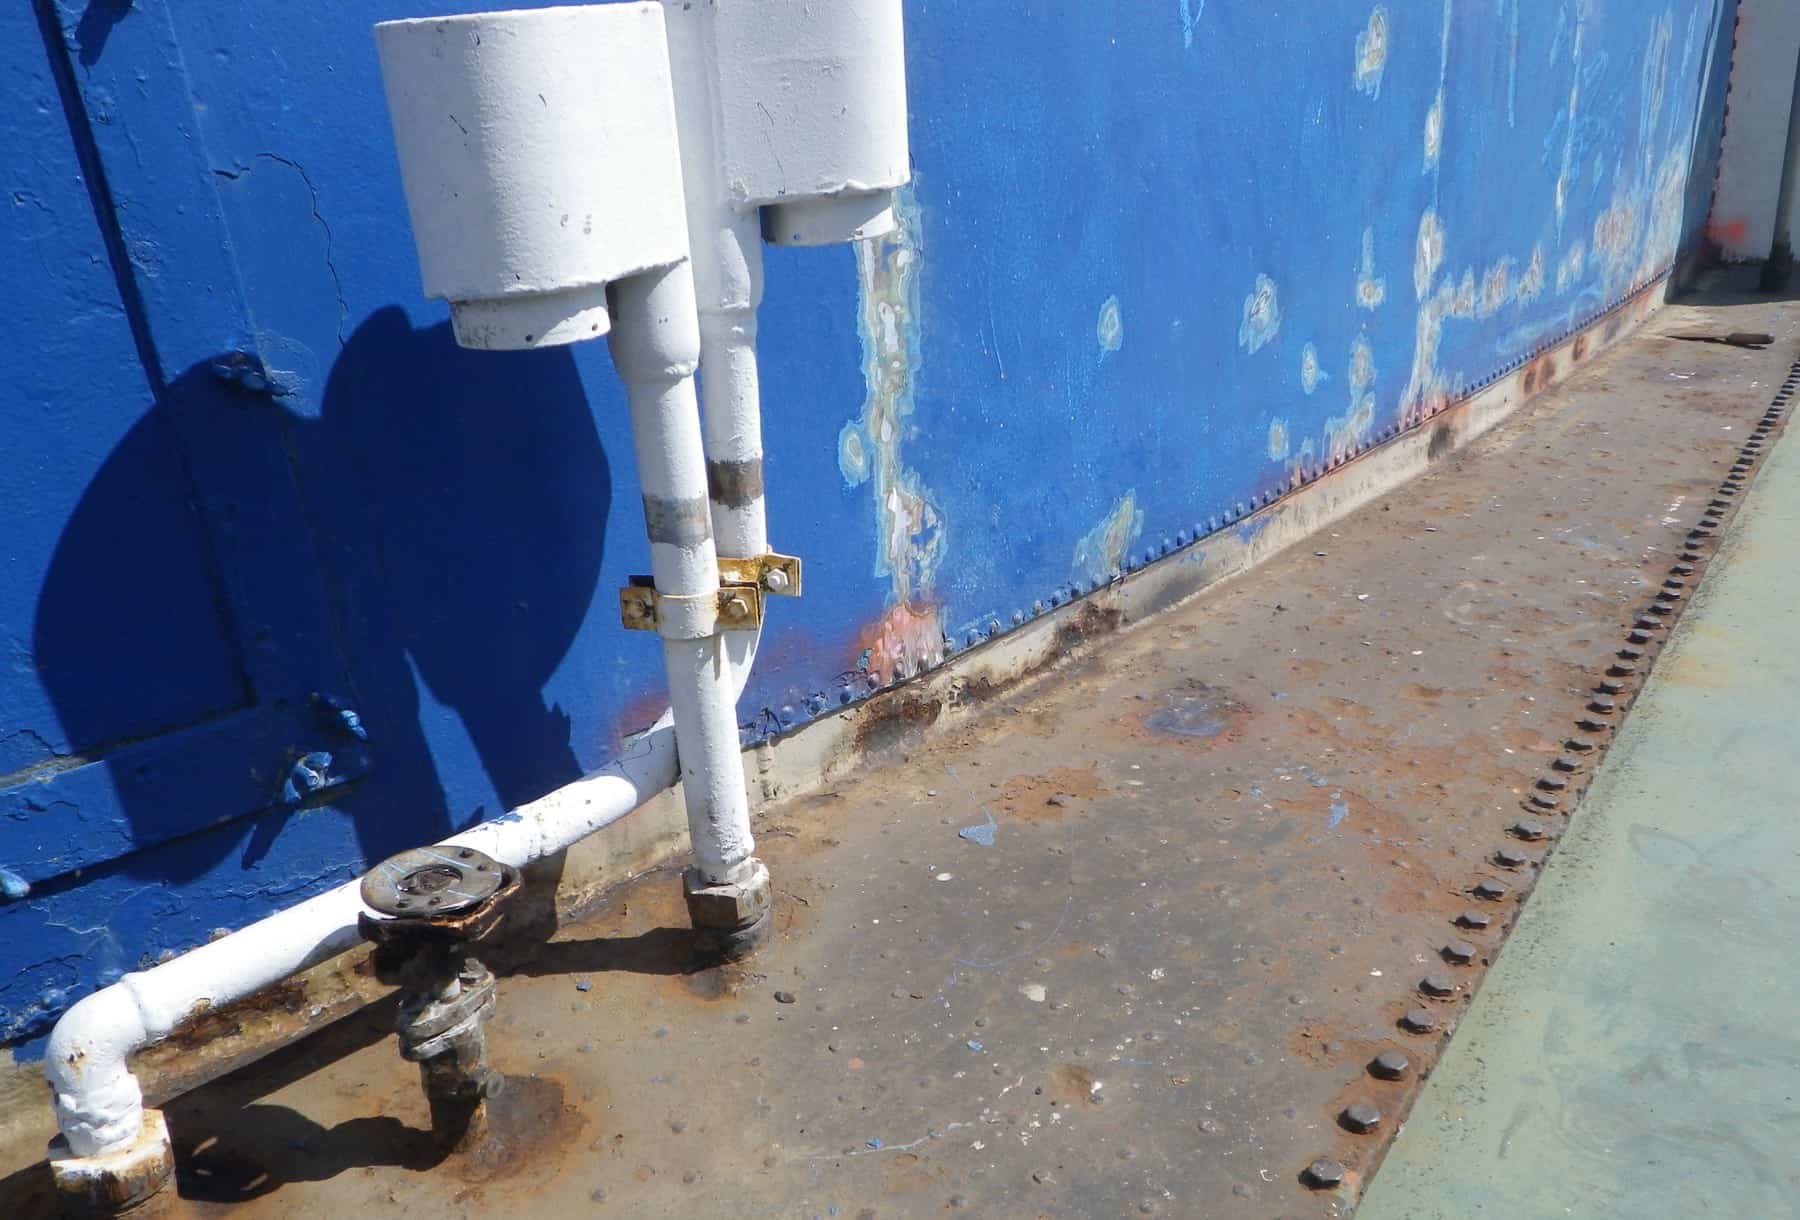 blistered blue funnel wall and ship decking/pipes